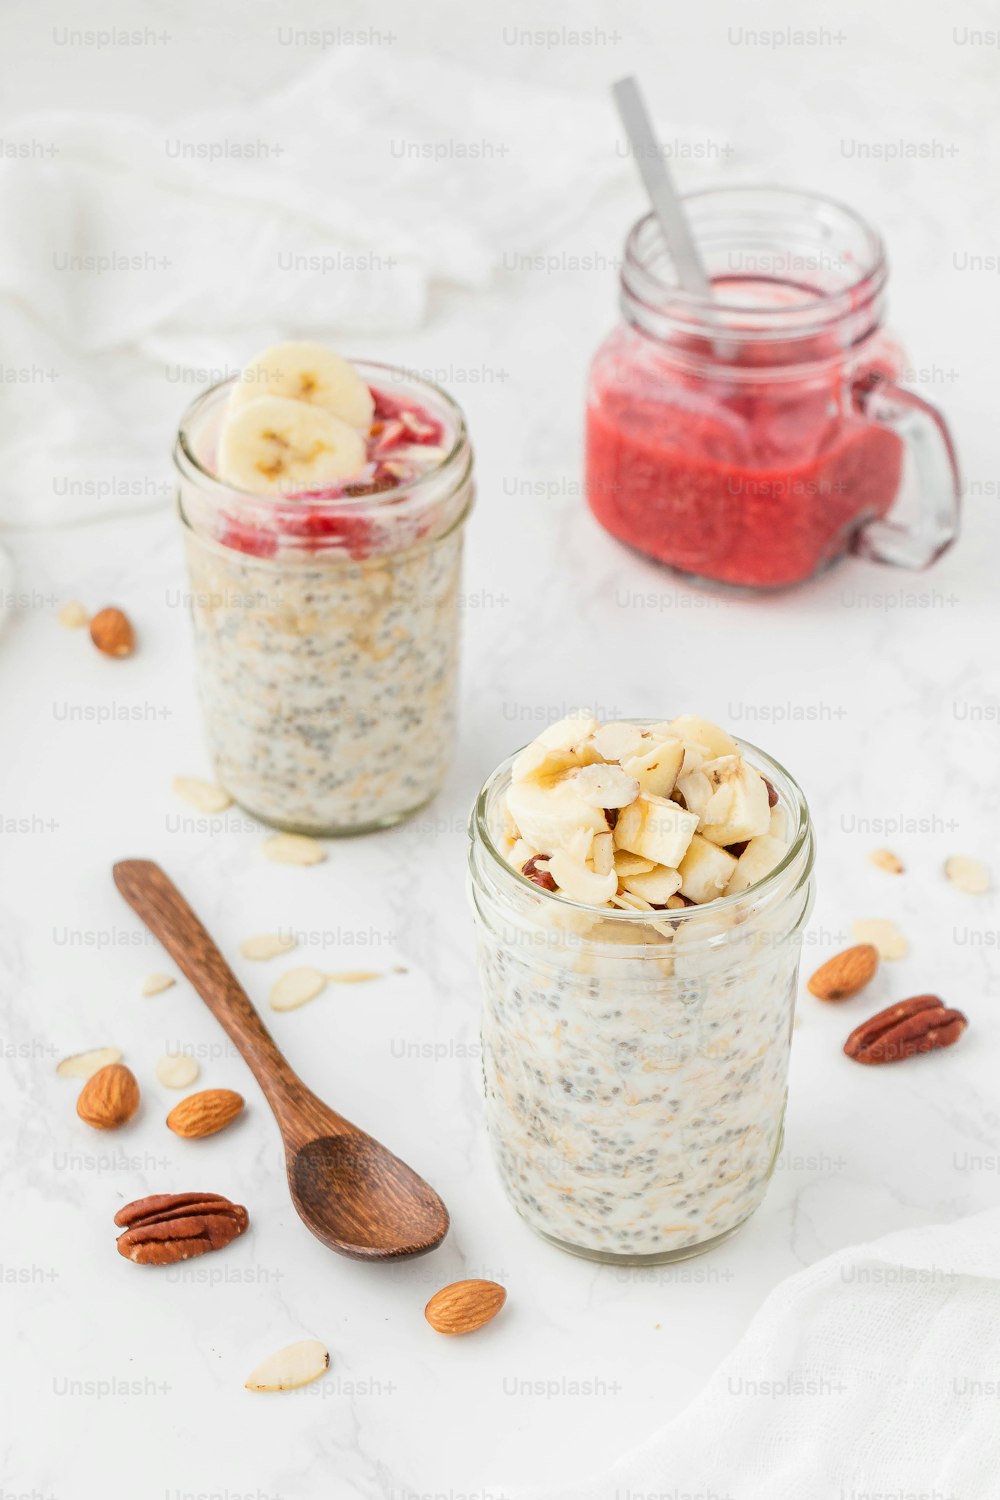 two jars filled with oatmeal, nuts, and fruit